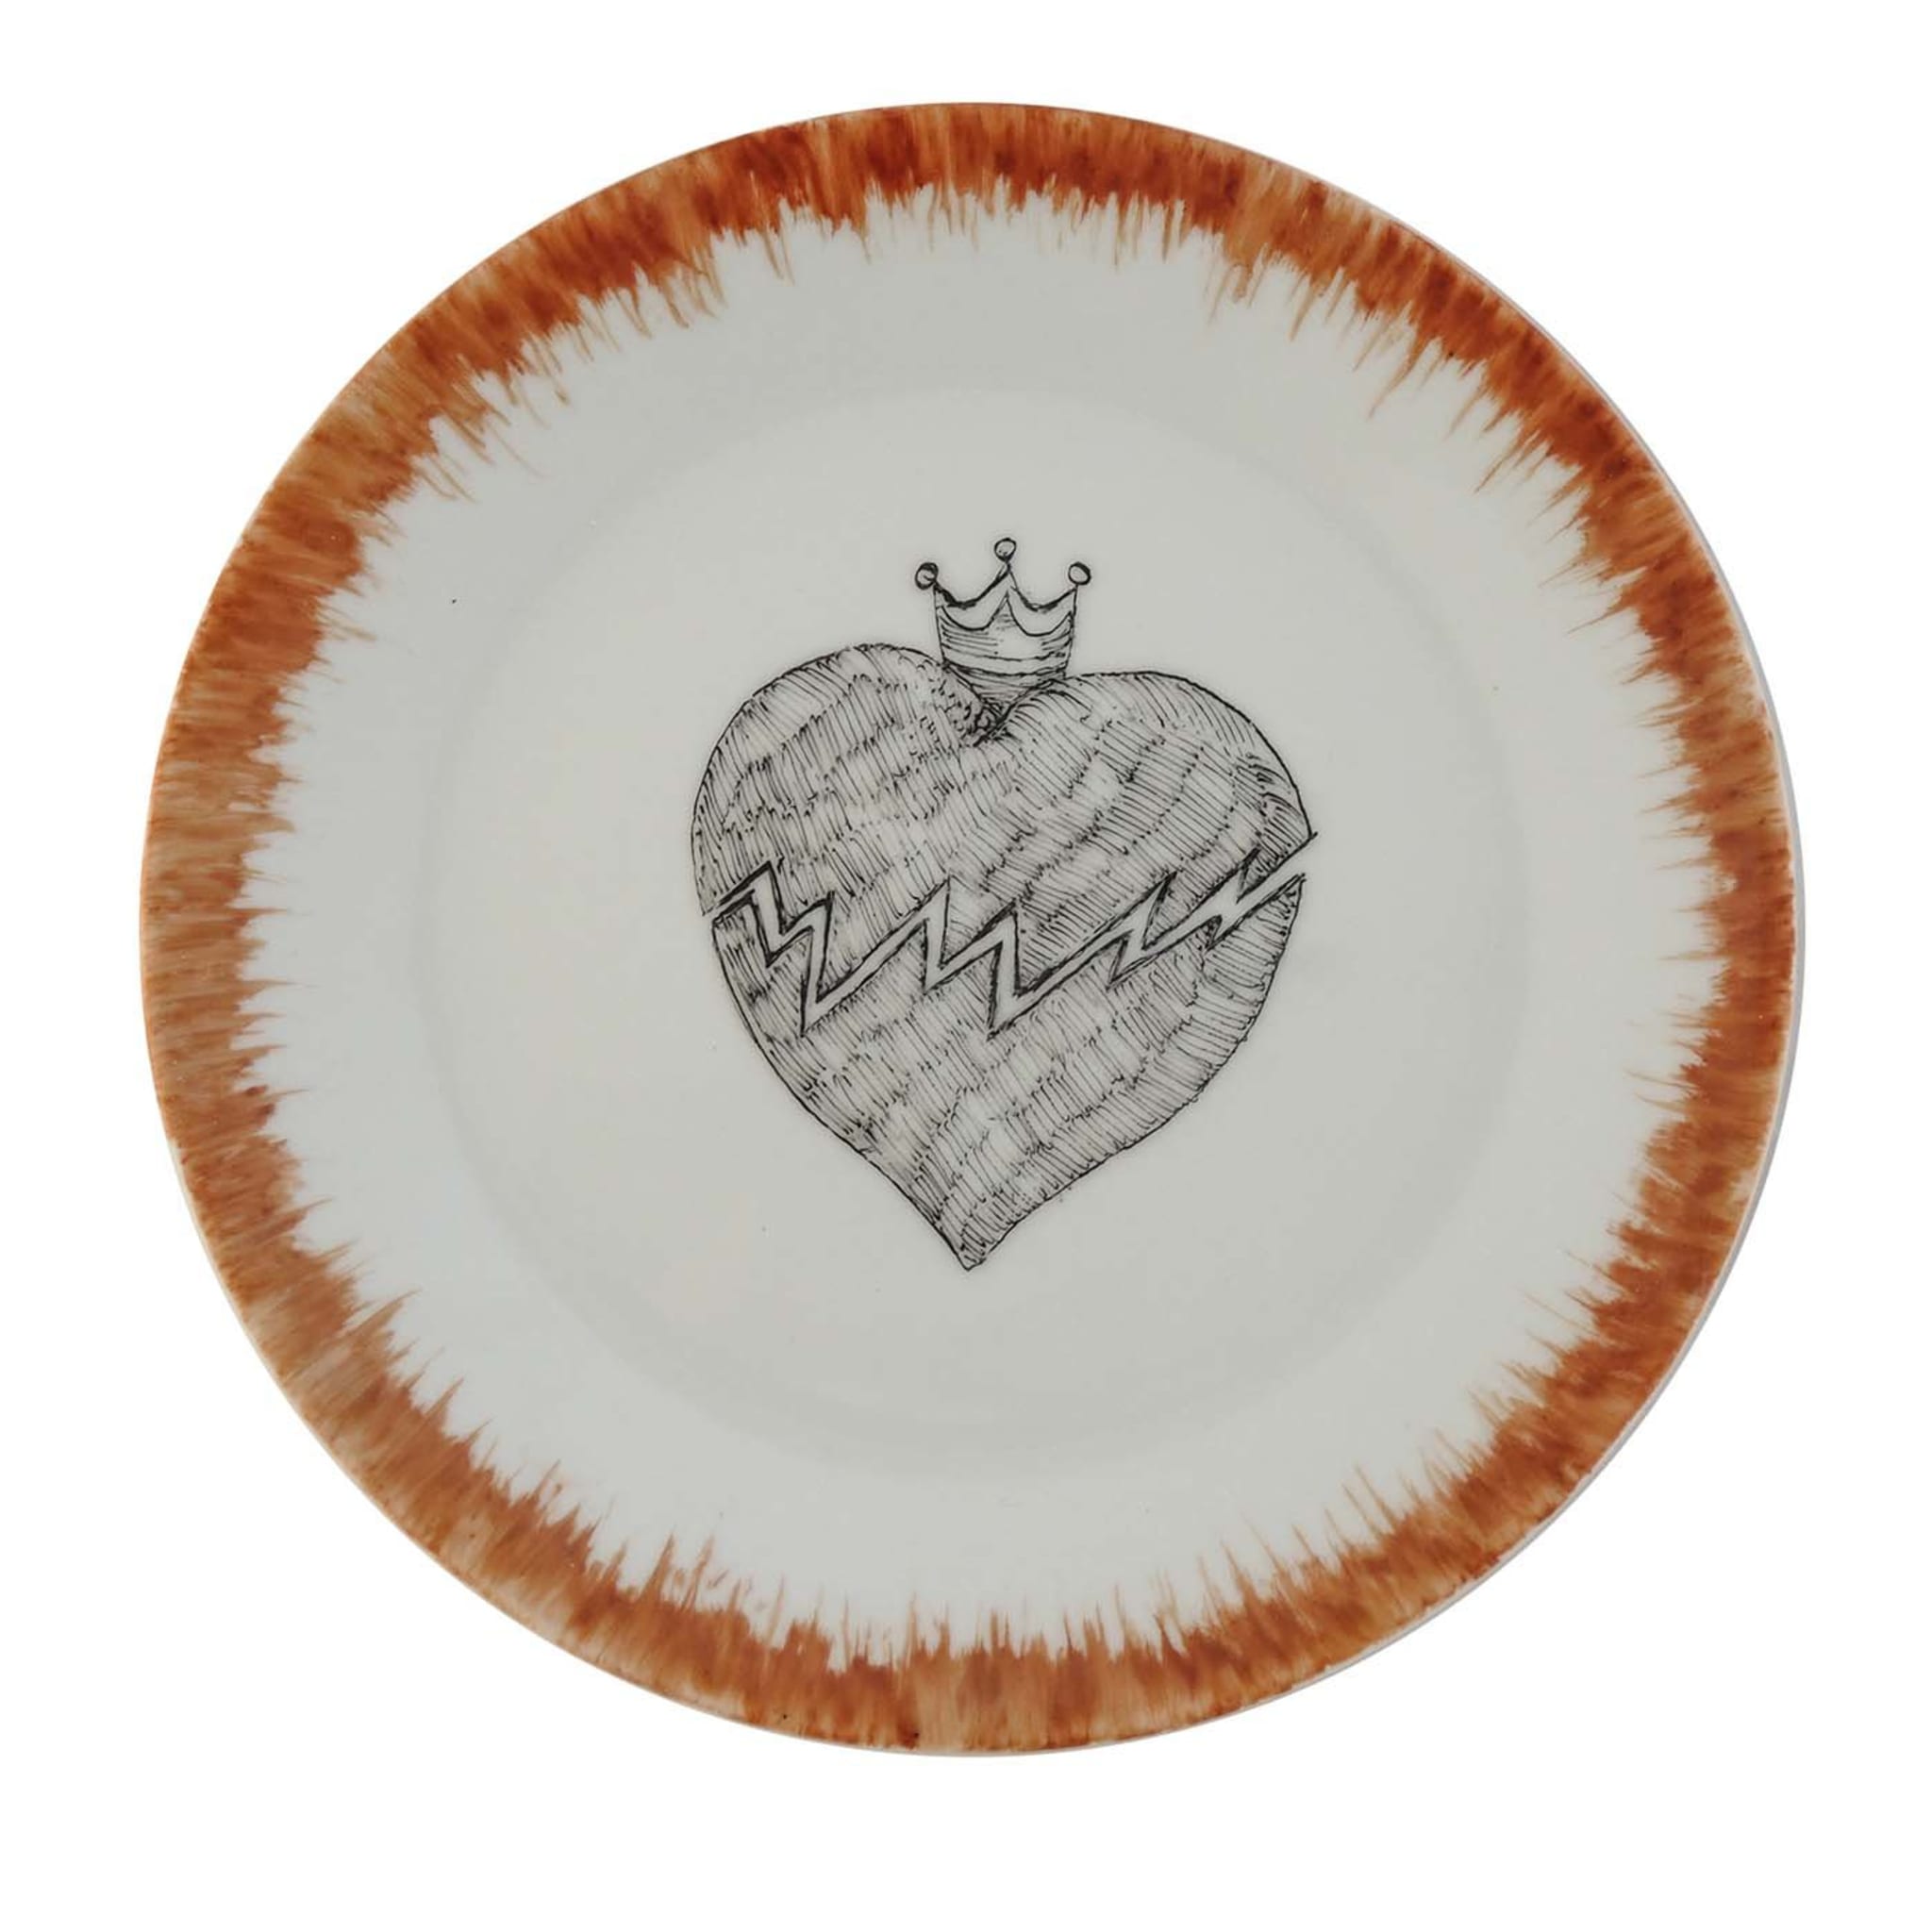 Broken Heart Plate - Hearts collection - Main view